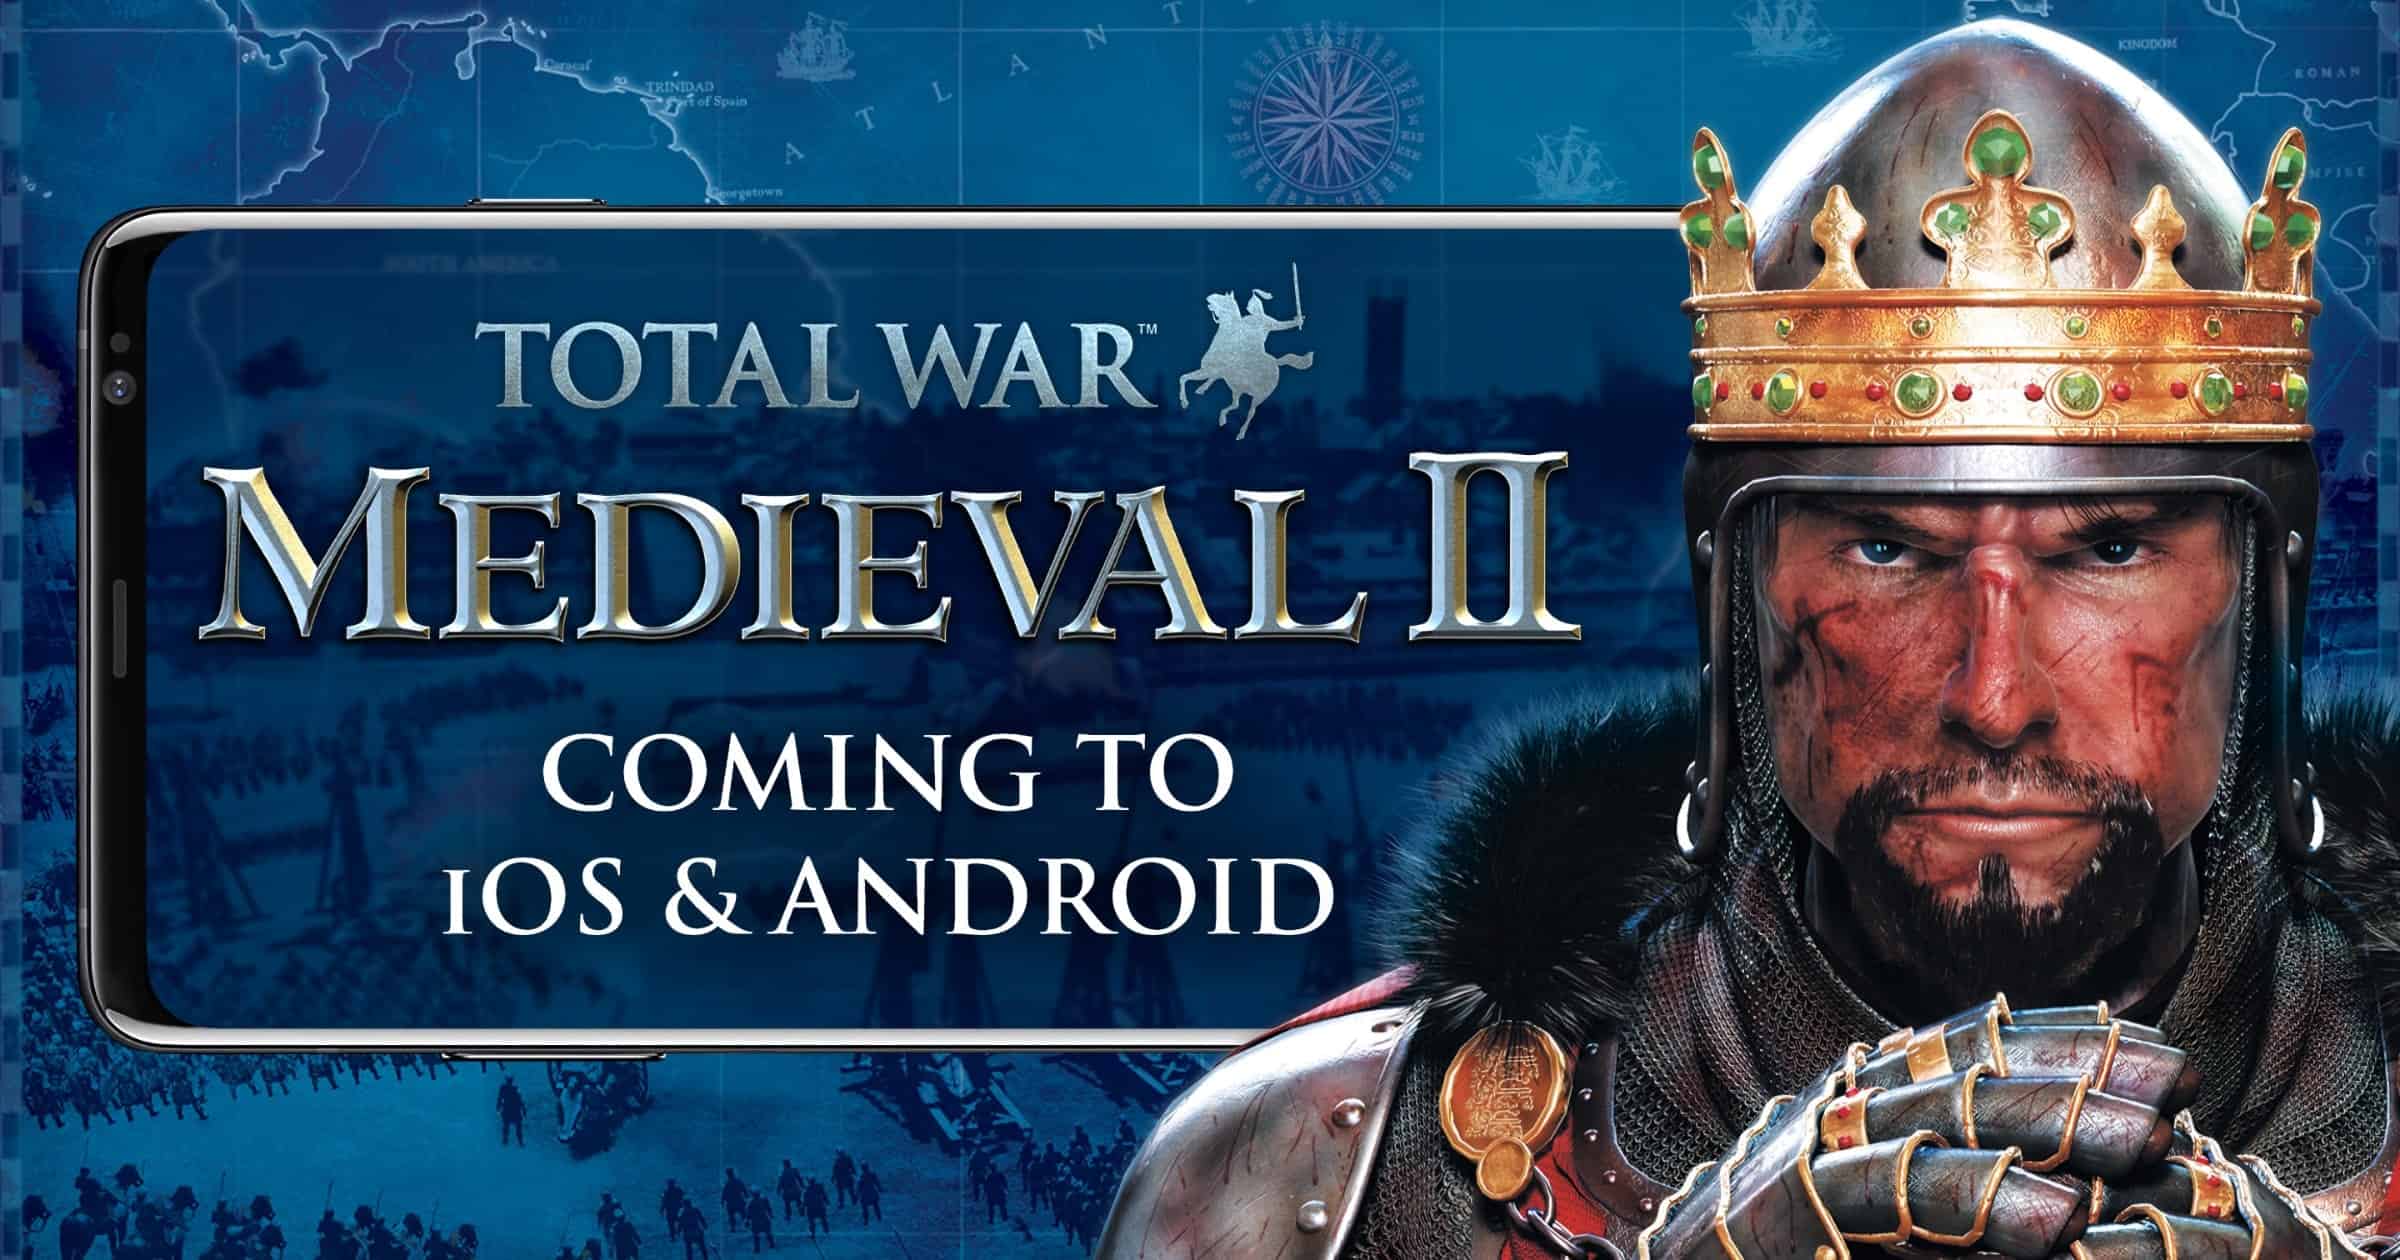 ‘Total War: MEDIEVAL II’ Game Comes to iOS in Spring 2022